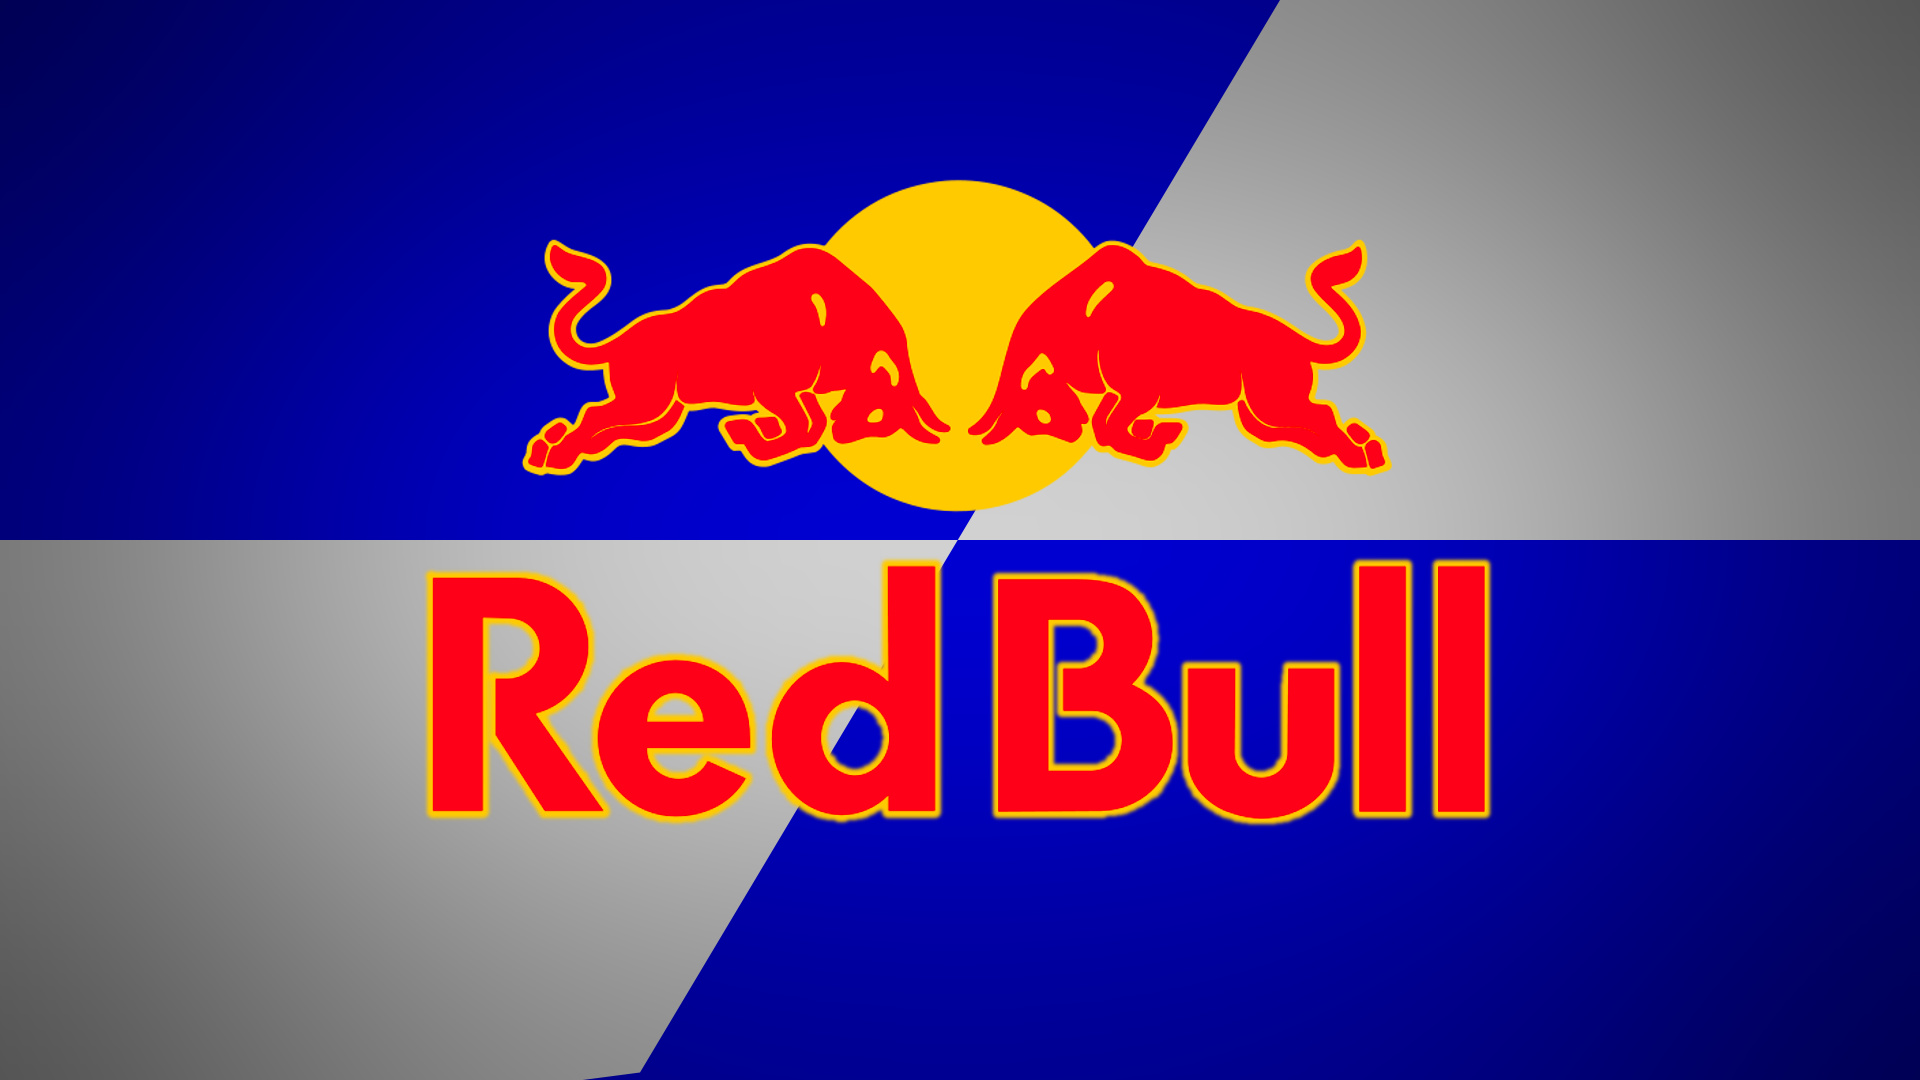 Red Bull Logo: Moderate doses of caffeine and taurine, Energy drink. 1920x1080 Full HD Background.